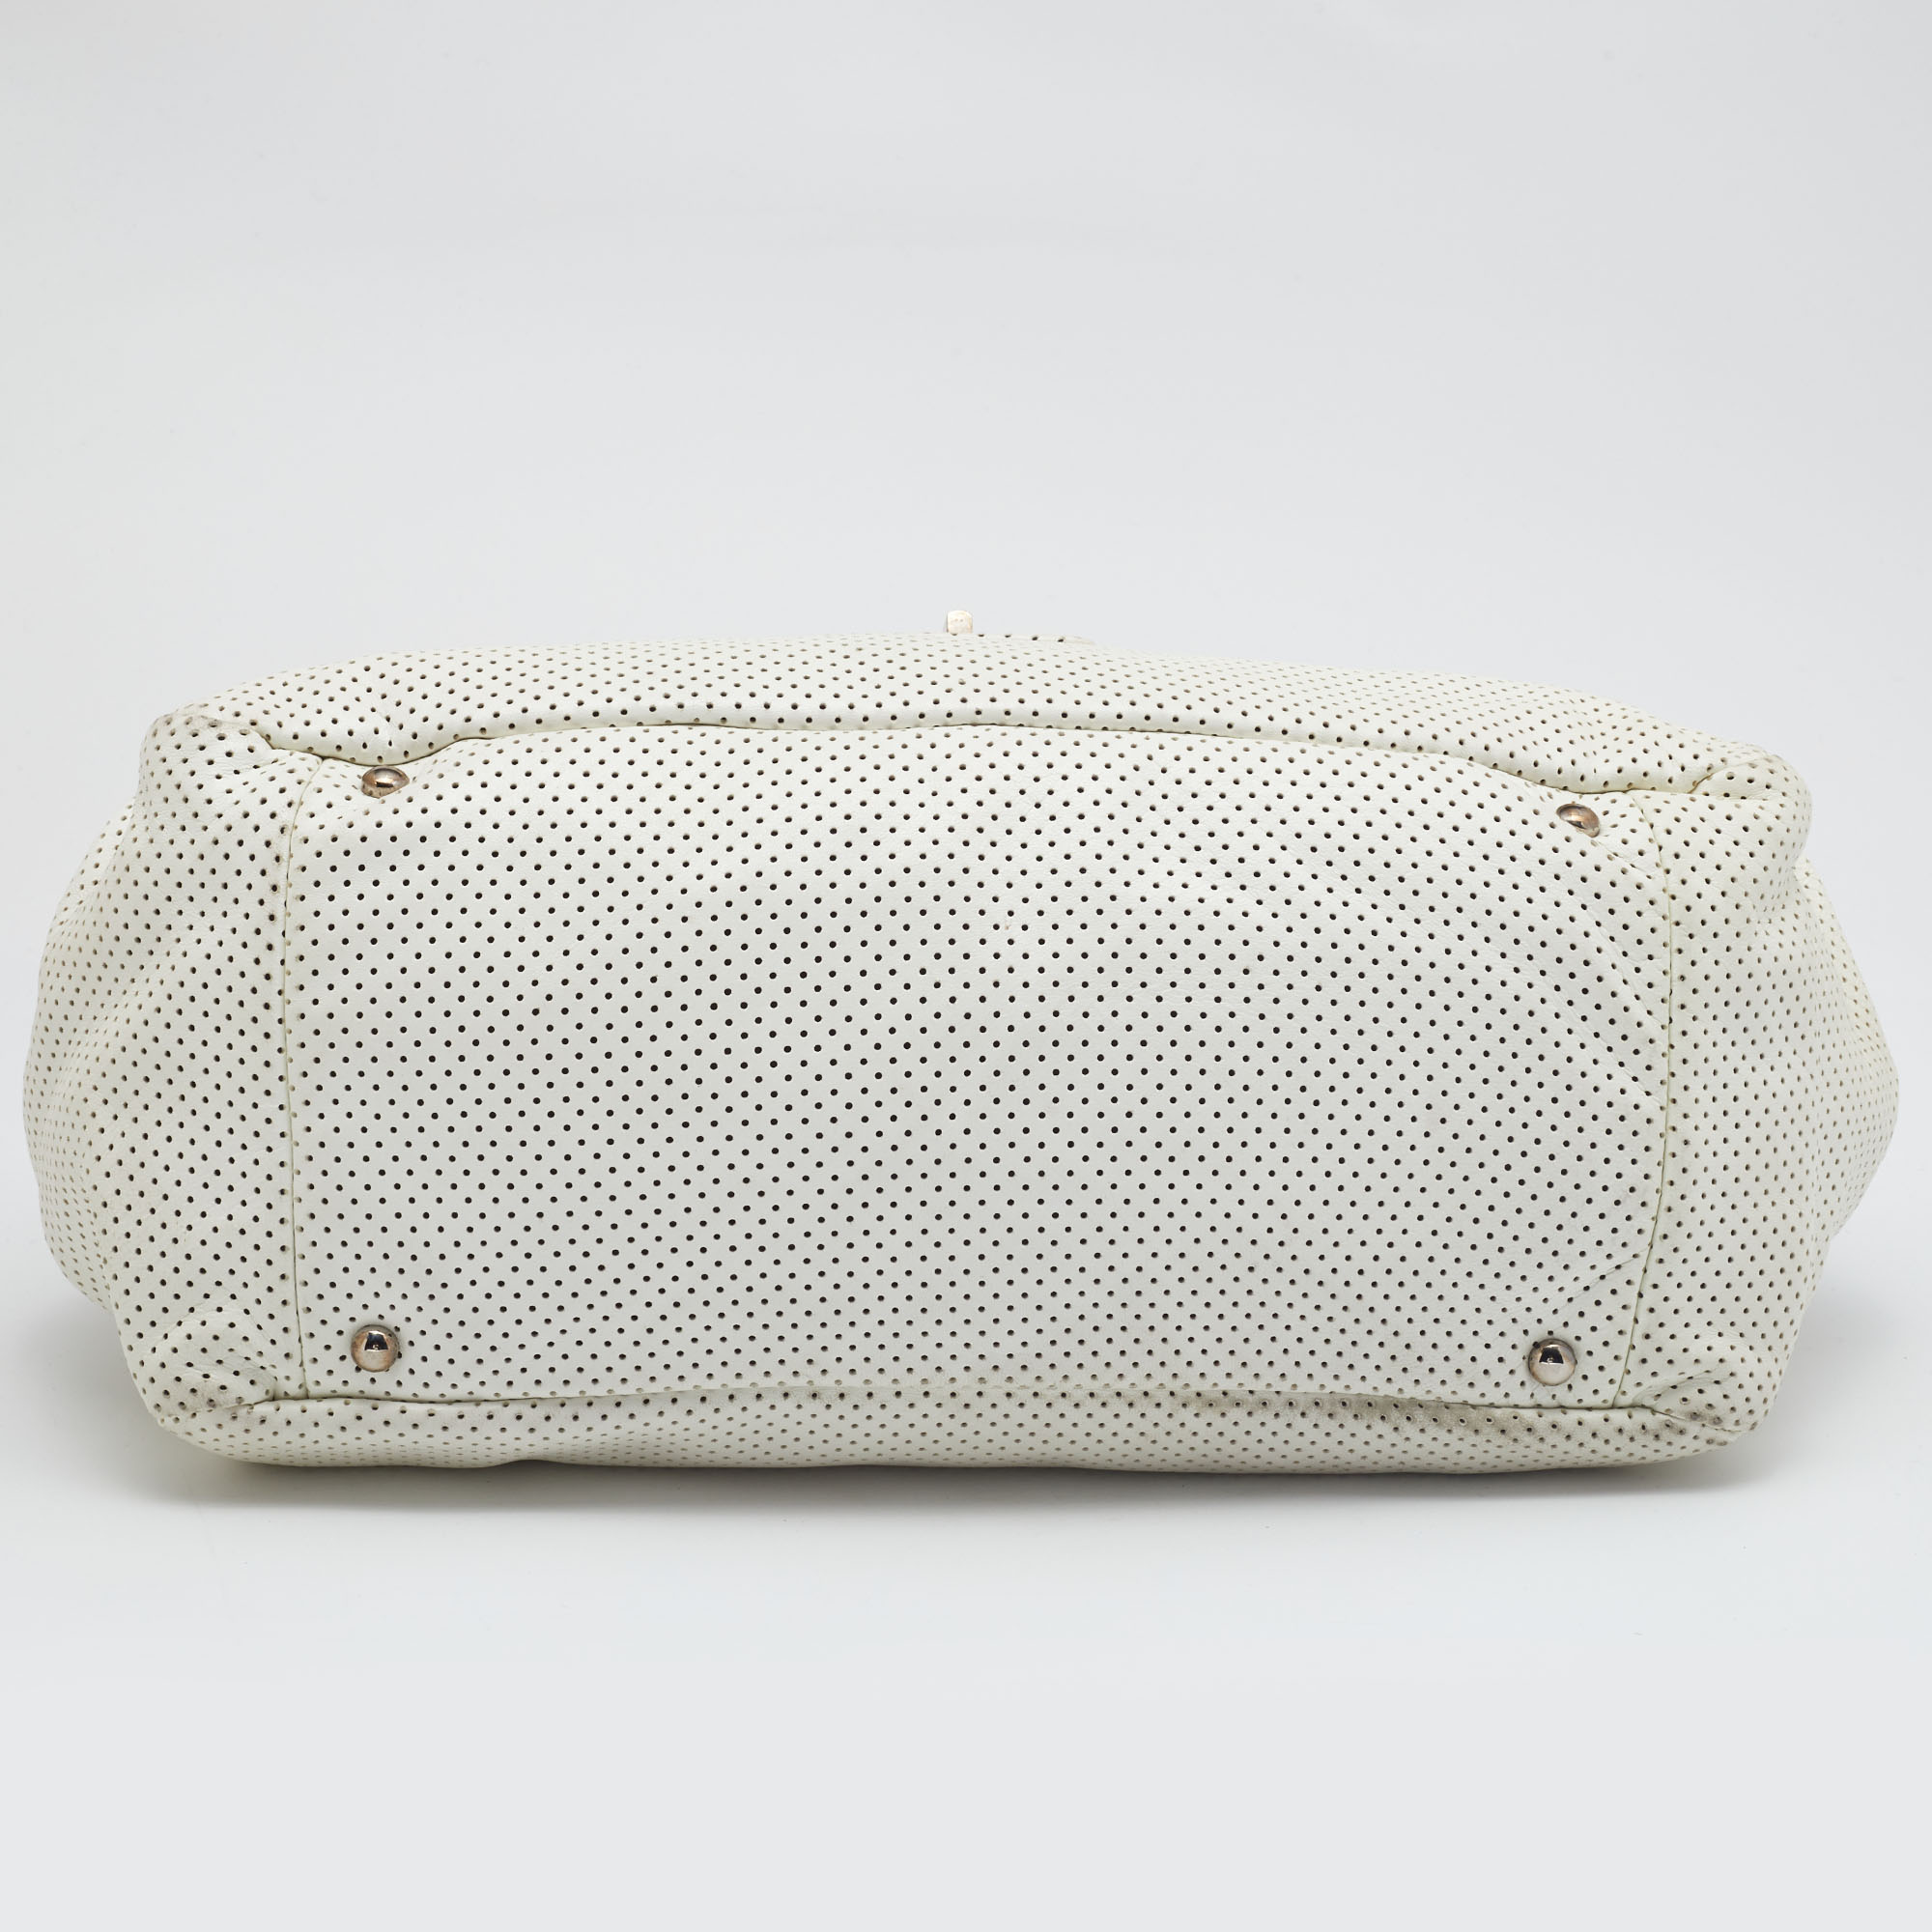 Chanel White Perforated Leather Accordion Flap Bag